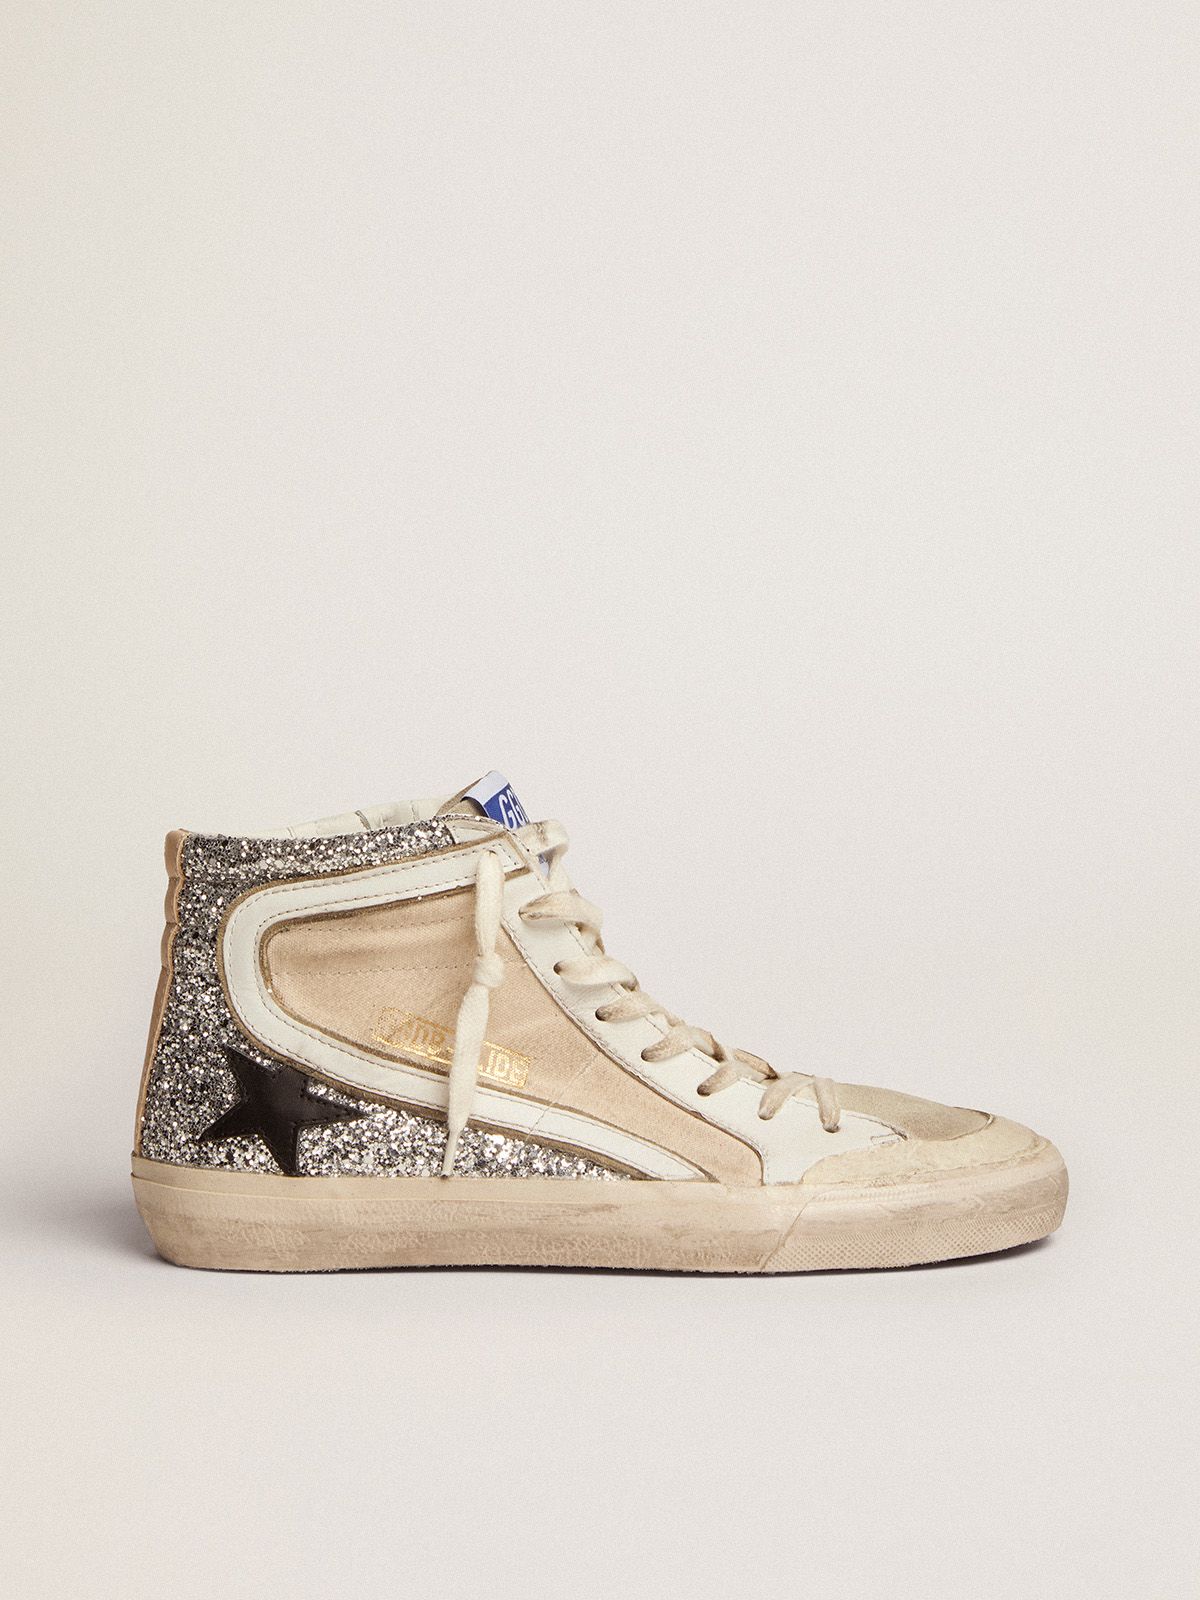 Penstar Slide sneakers in cream-colored canvas and silver glitter with black leather star | 